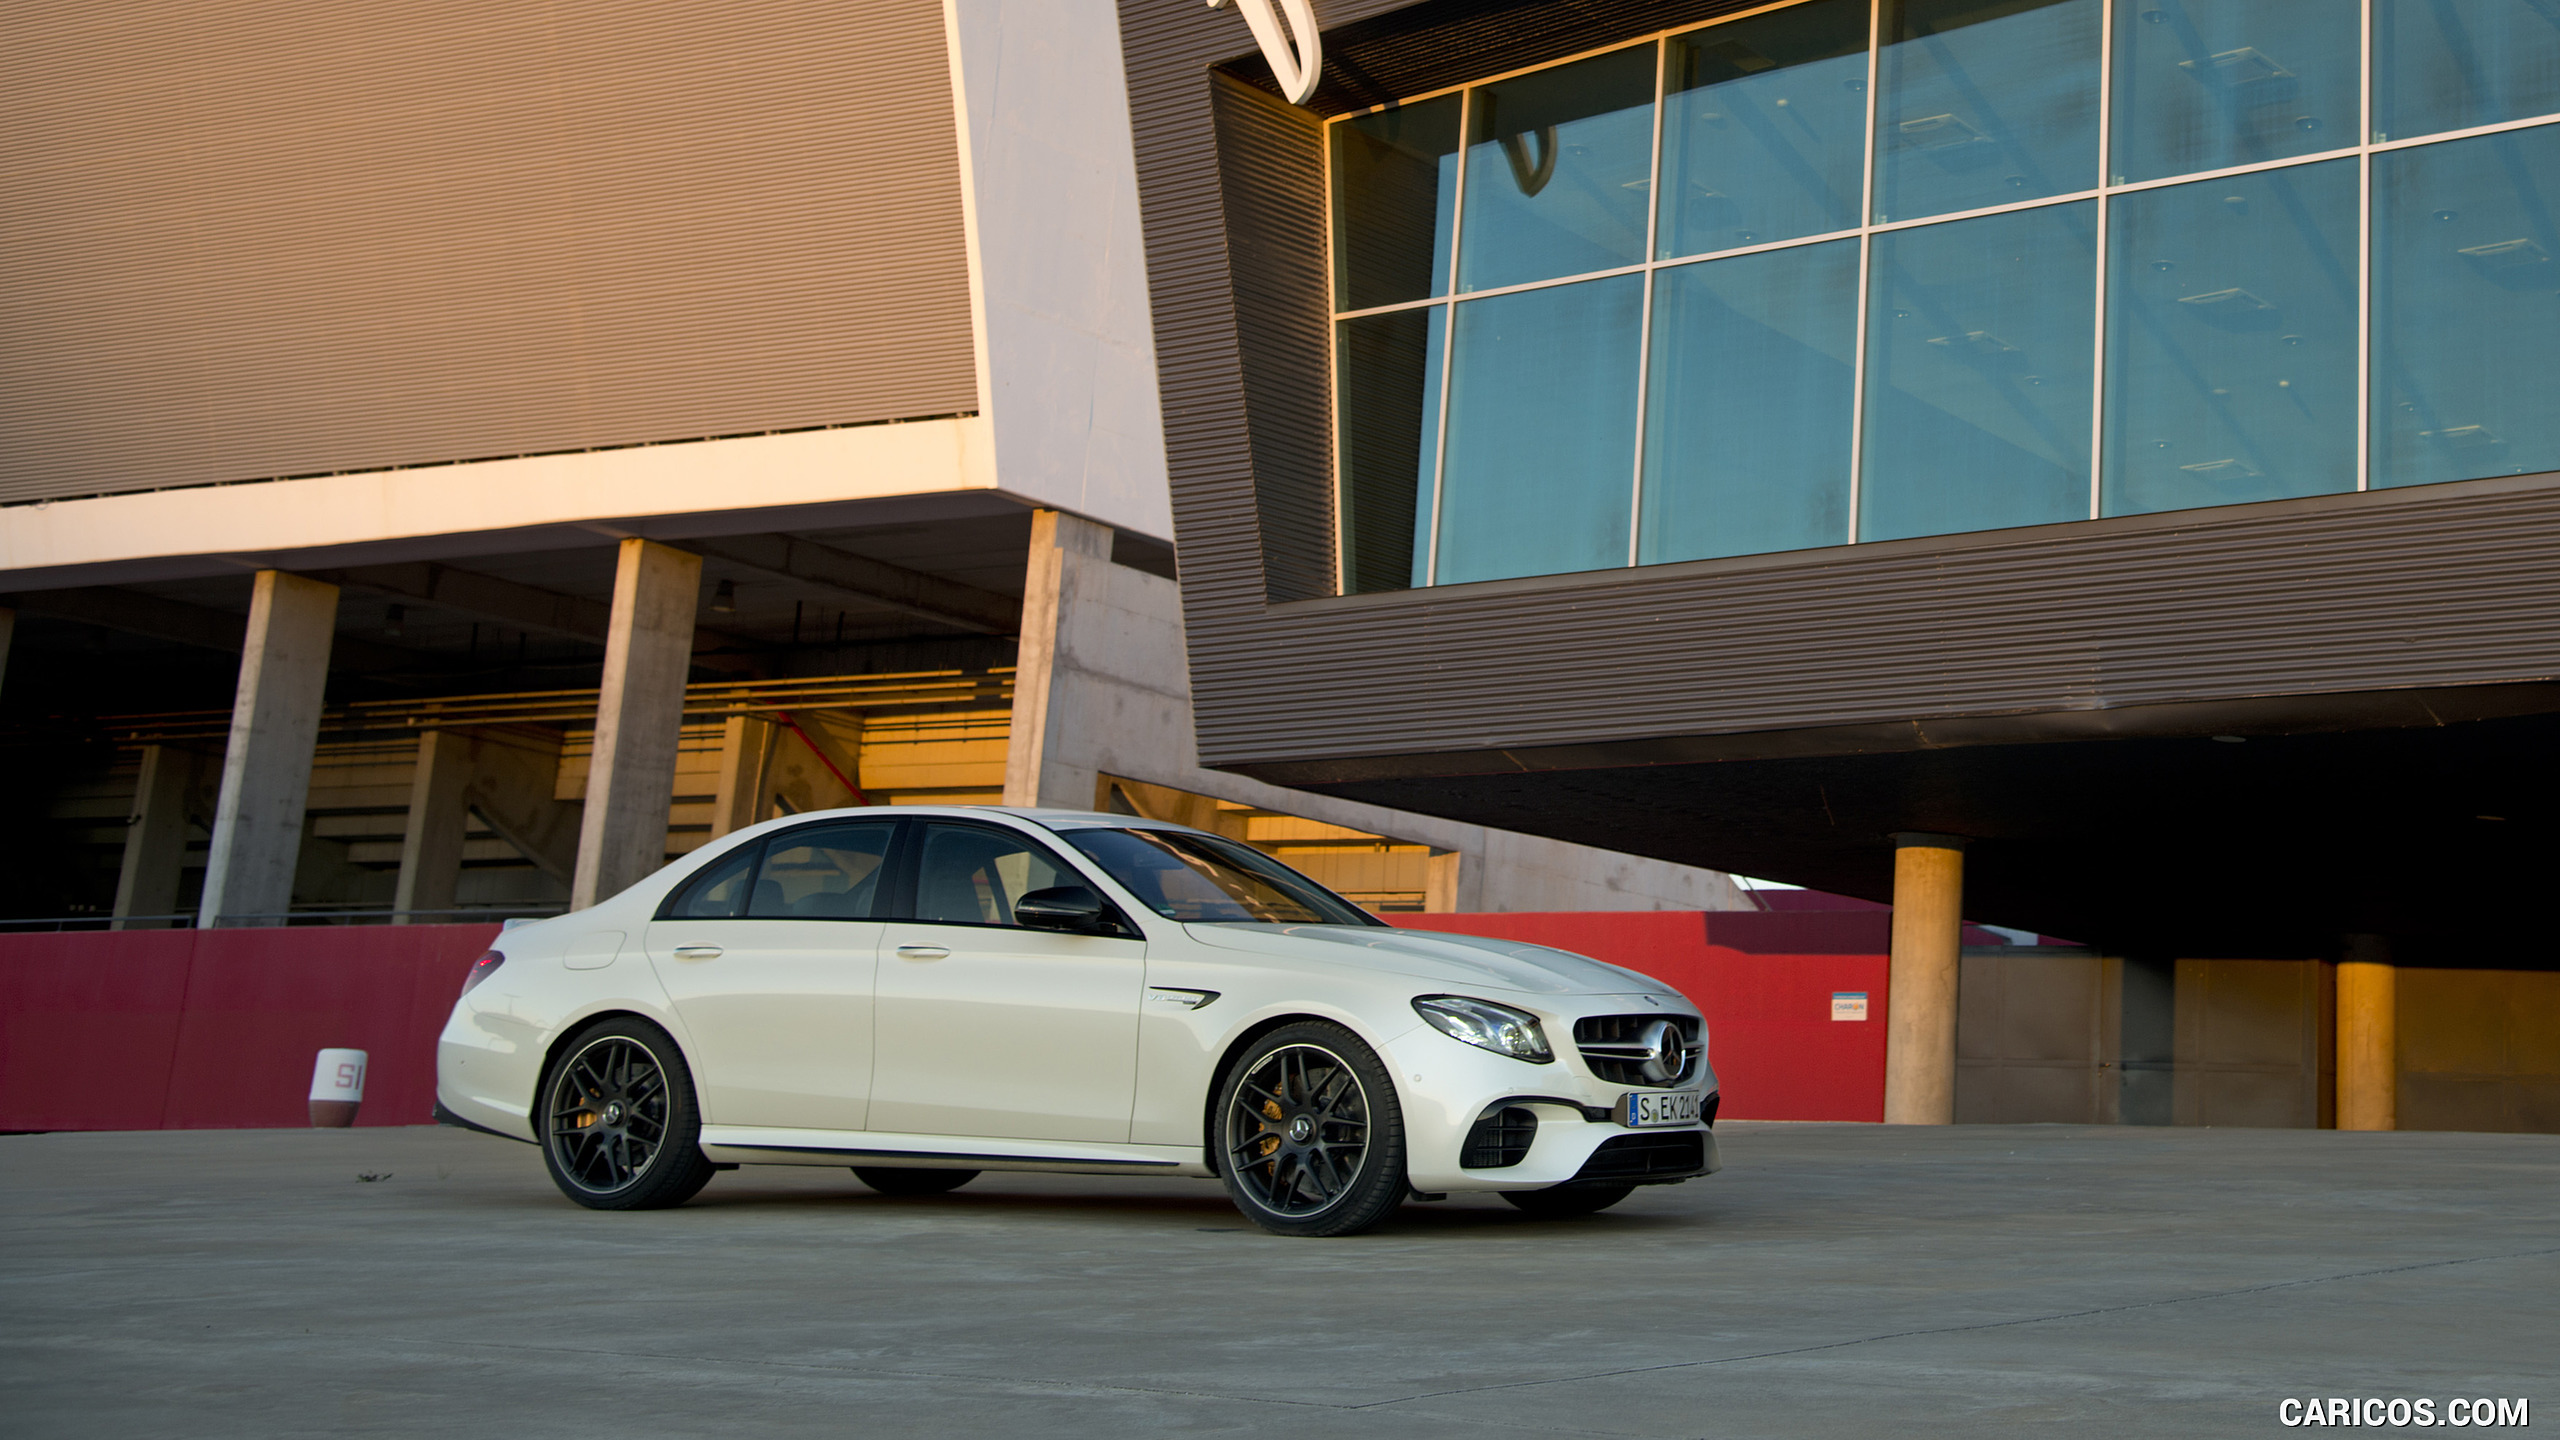 2018 Mercedes-AMG E63 S 4MATIC+ - Side, #80 of 323